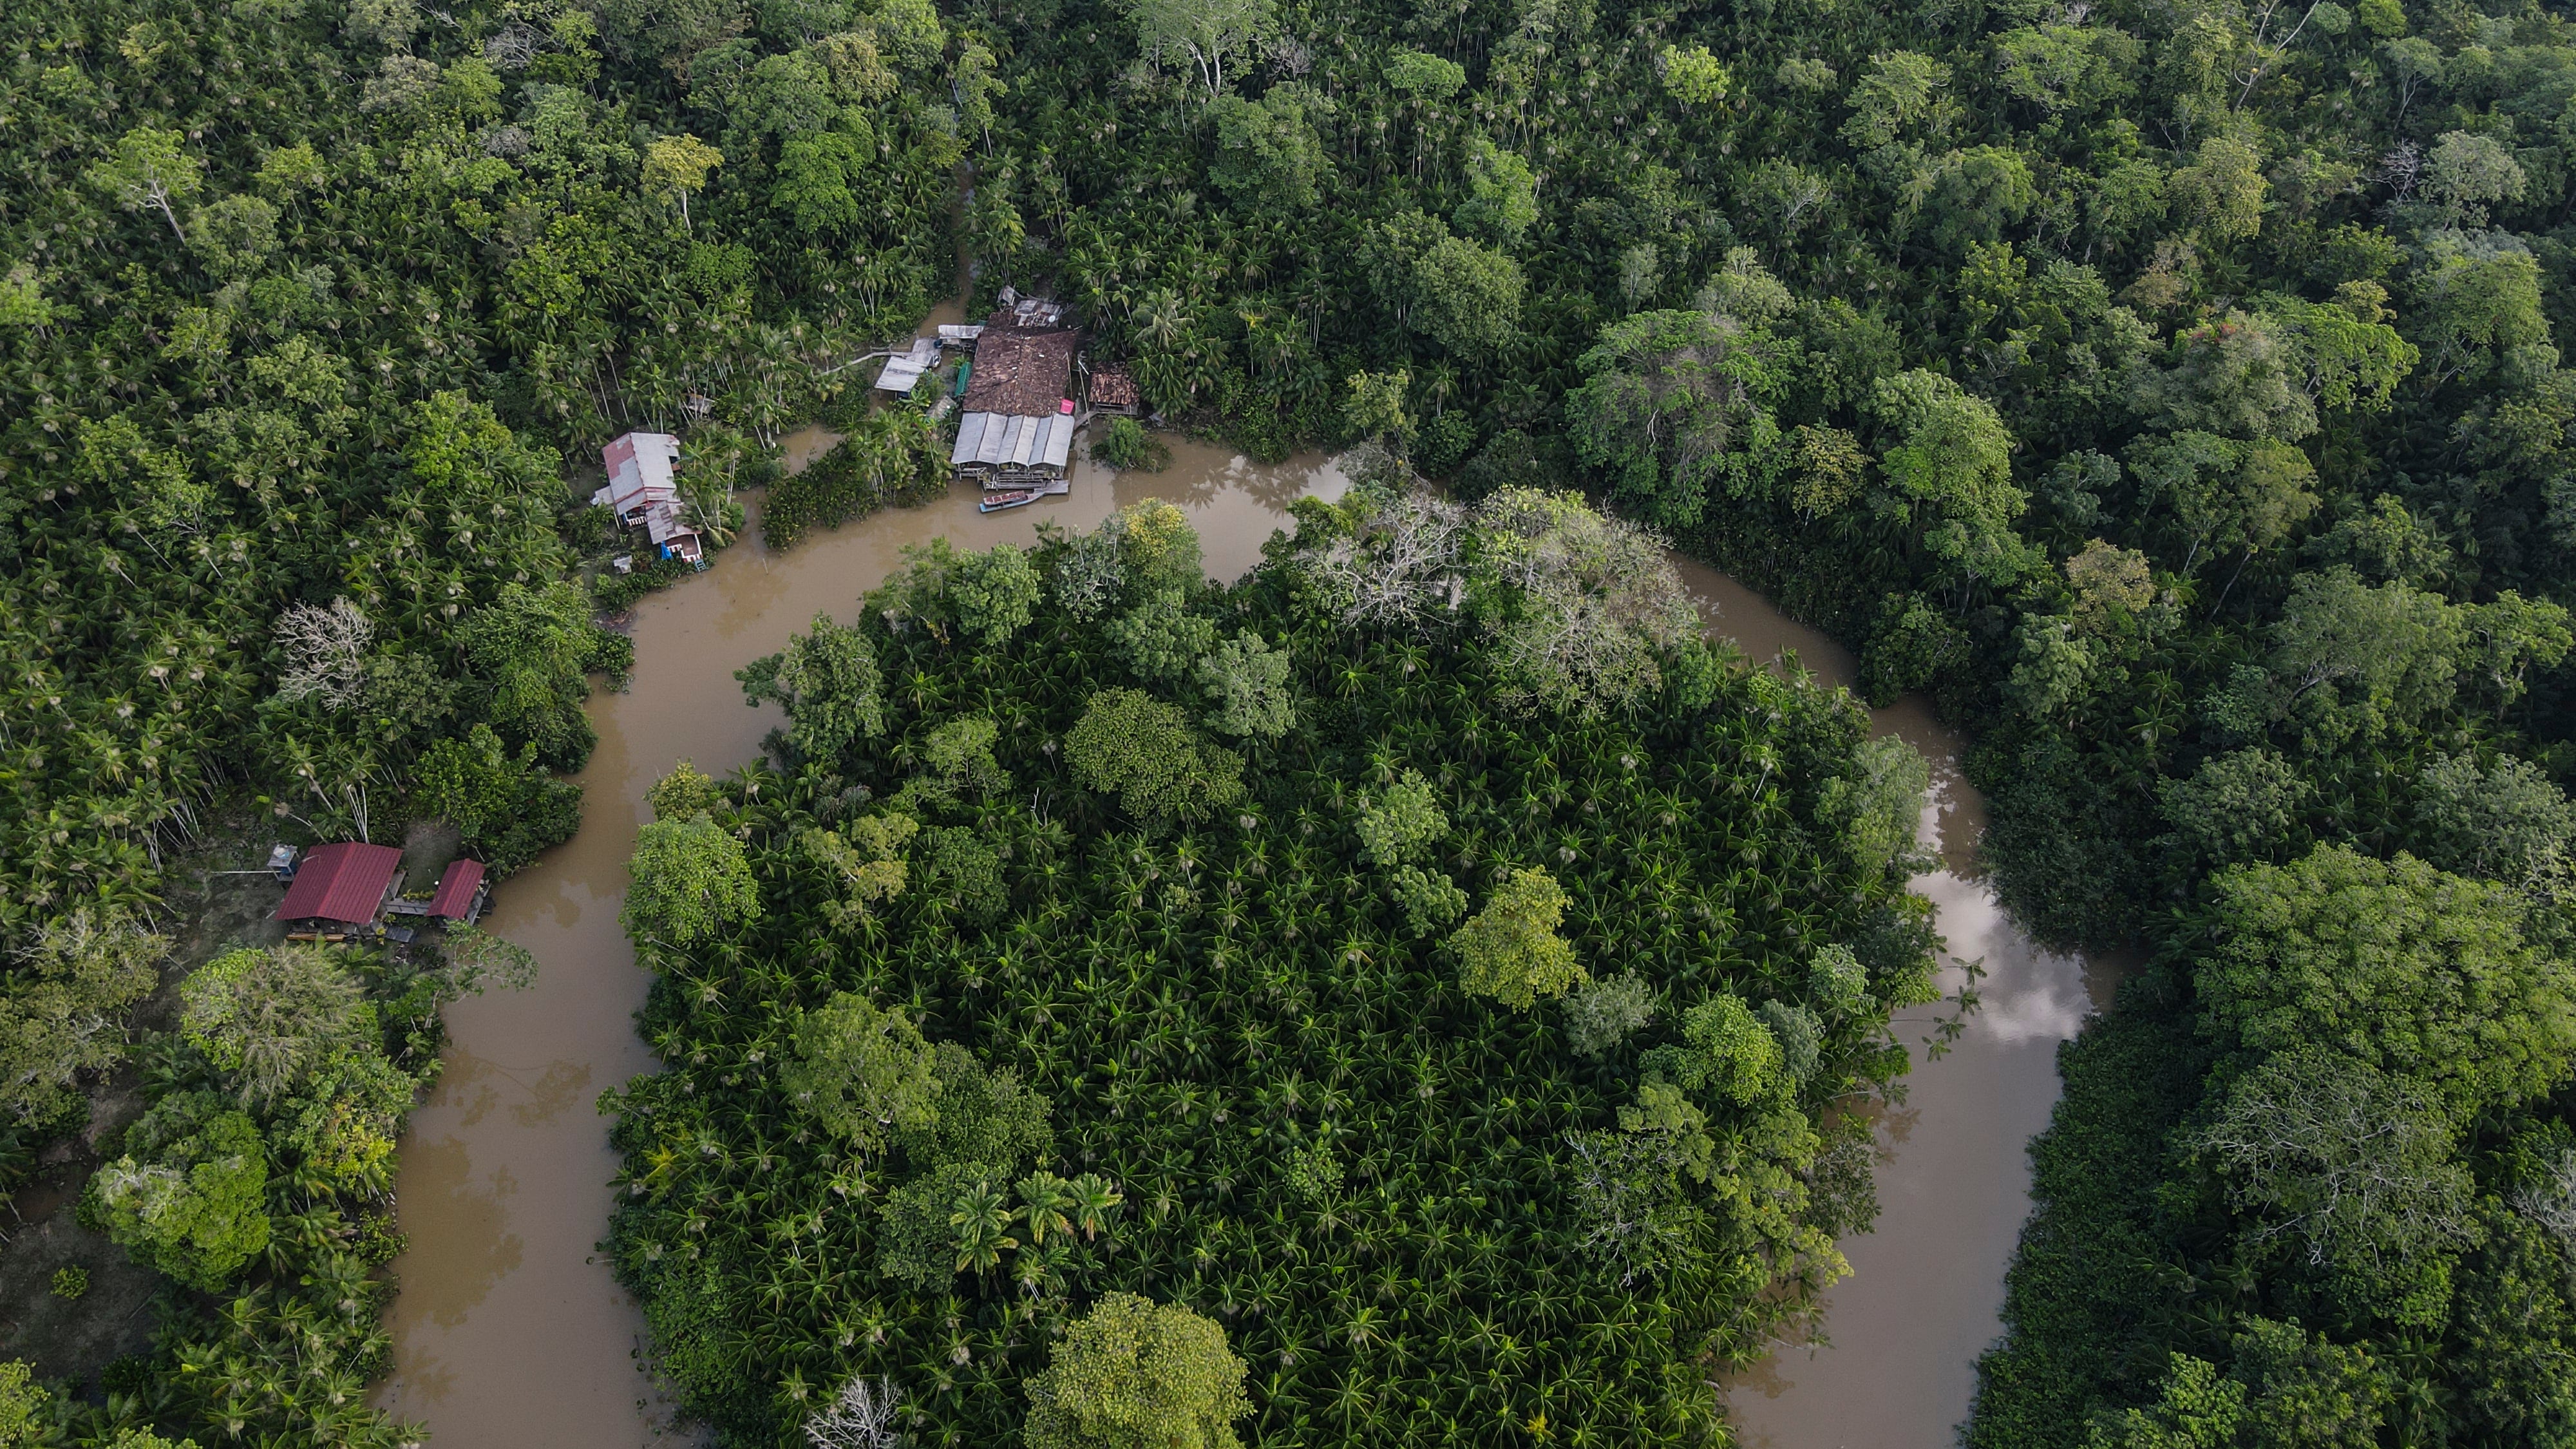 Aerial view of a part of the Amazon rainforest. The summit of the Amazon countries will be held in the city of Belém, to promote a new development model that will attempt to end the cycle of destruction.